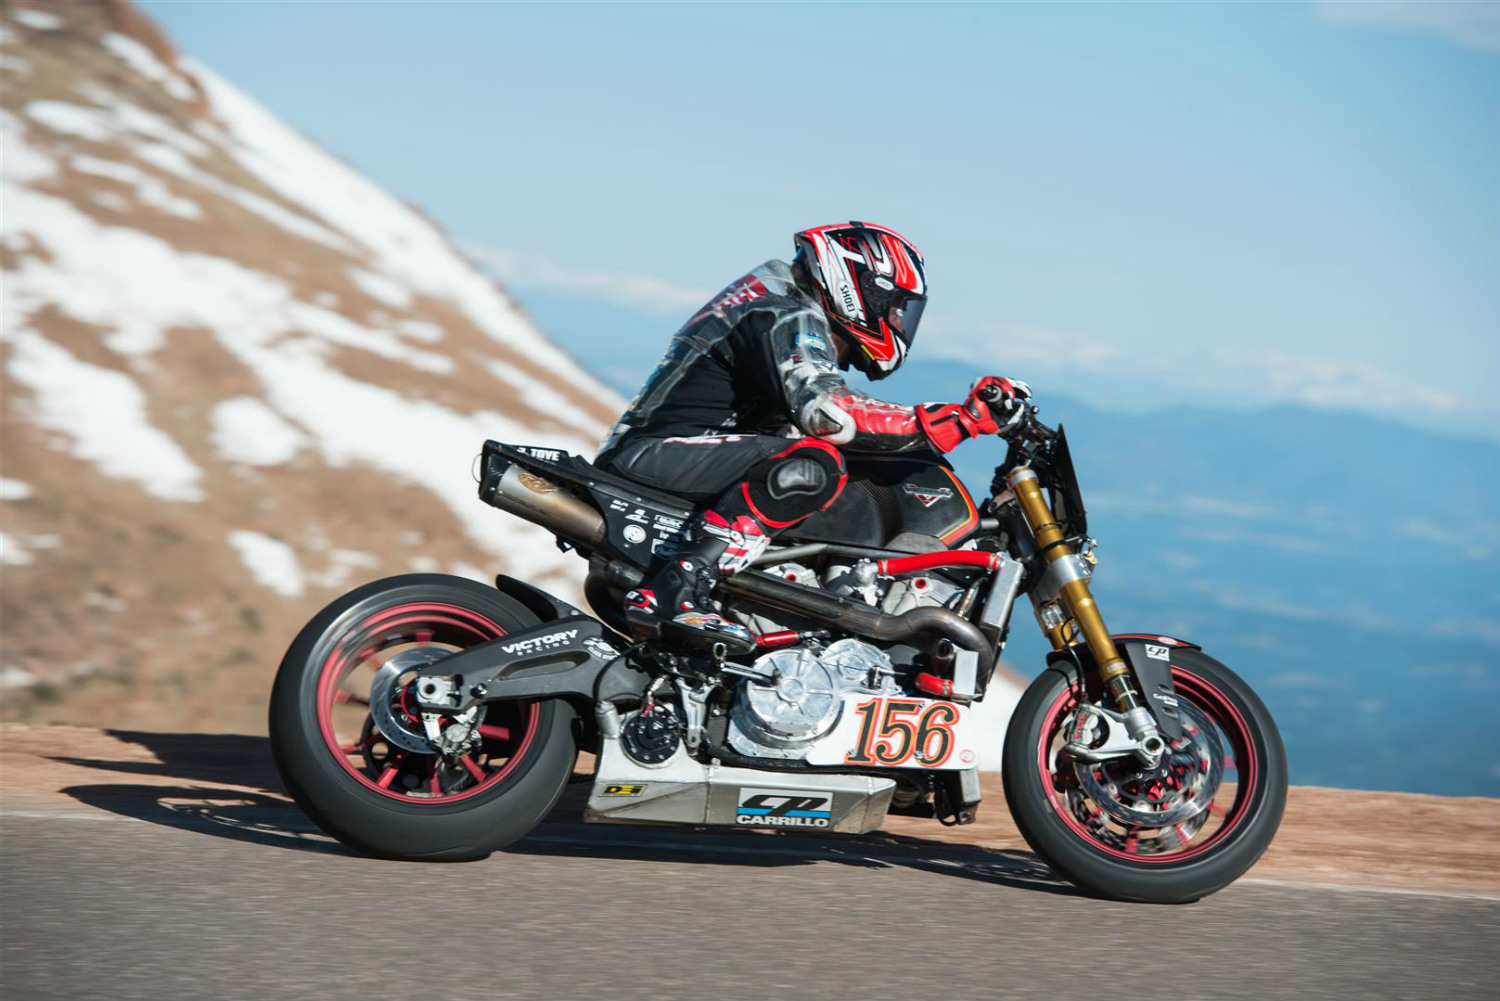 victory motorcycles empulse rr takes first at pikes peak project 156